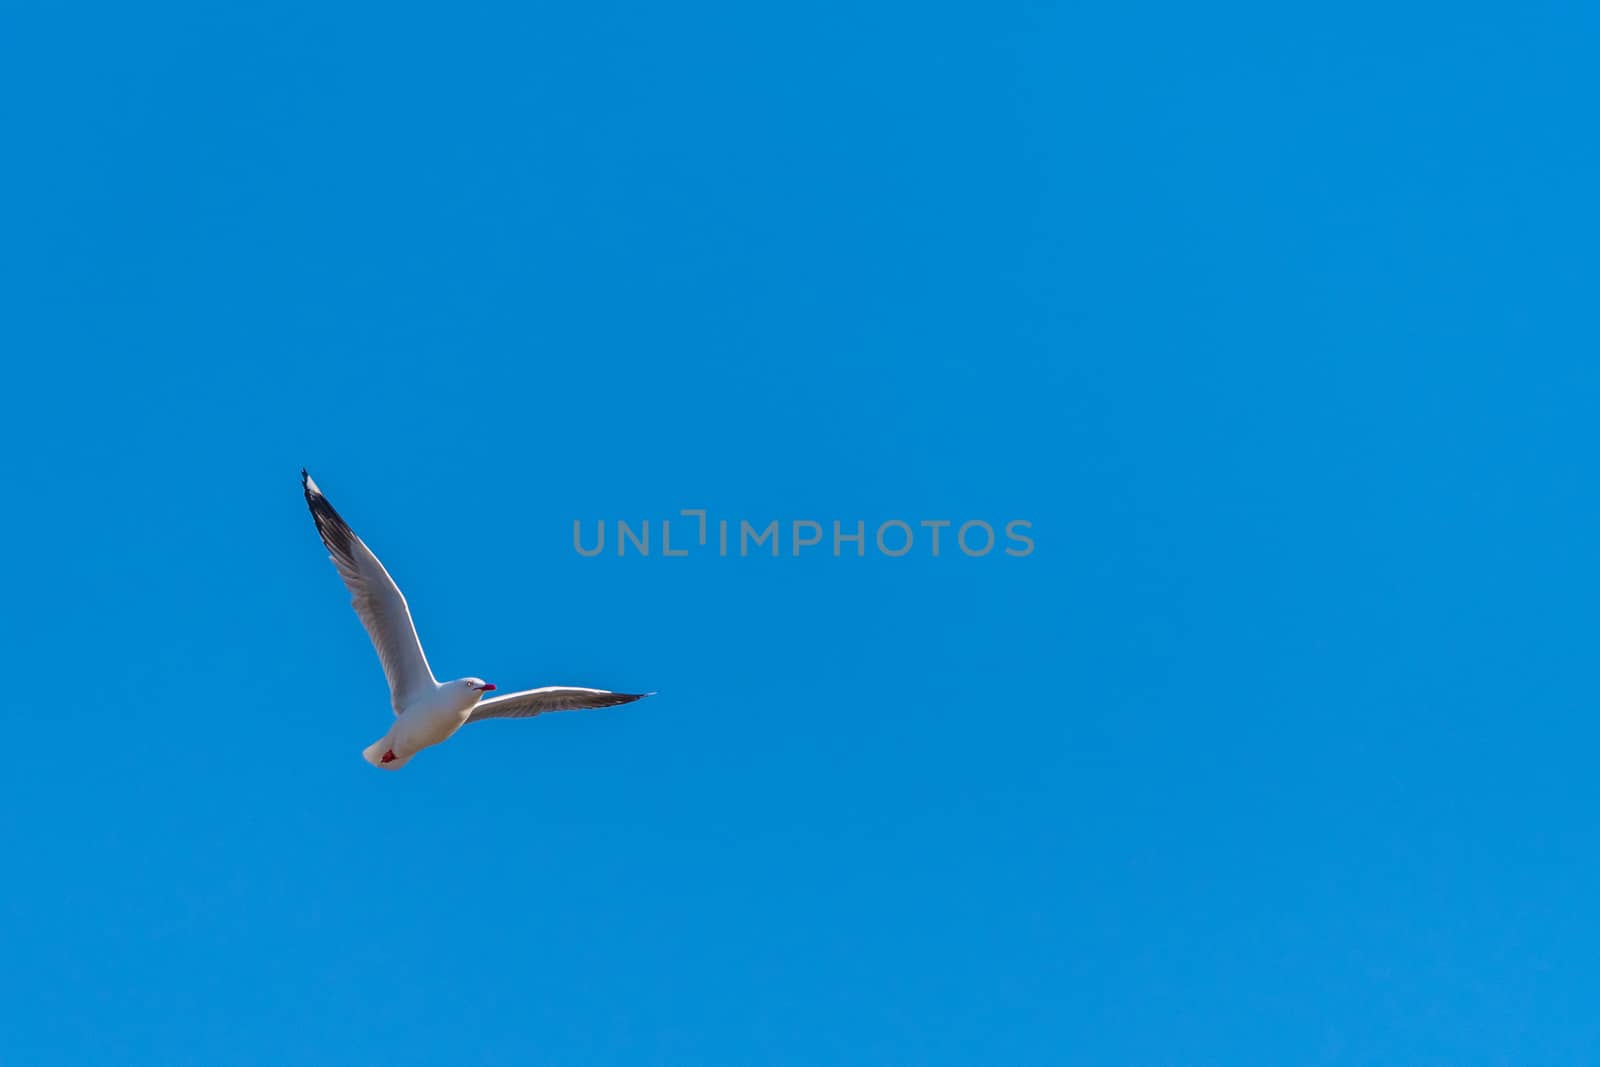 Single seagull flying on a blue sky background by mauricallari